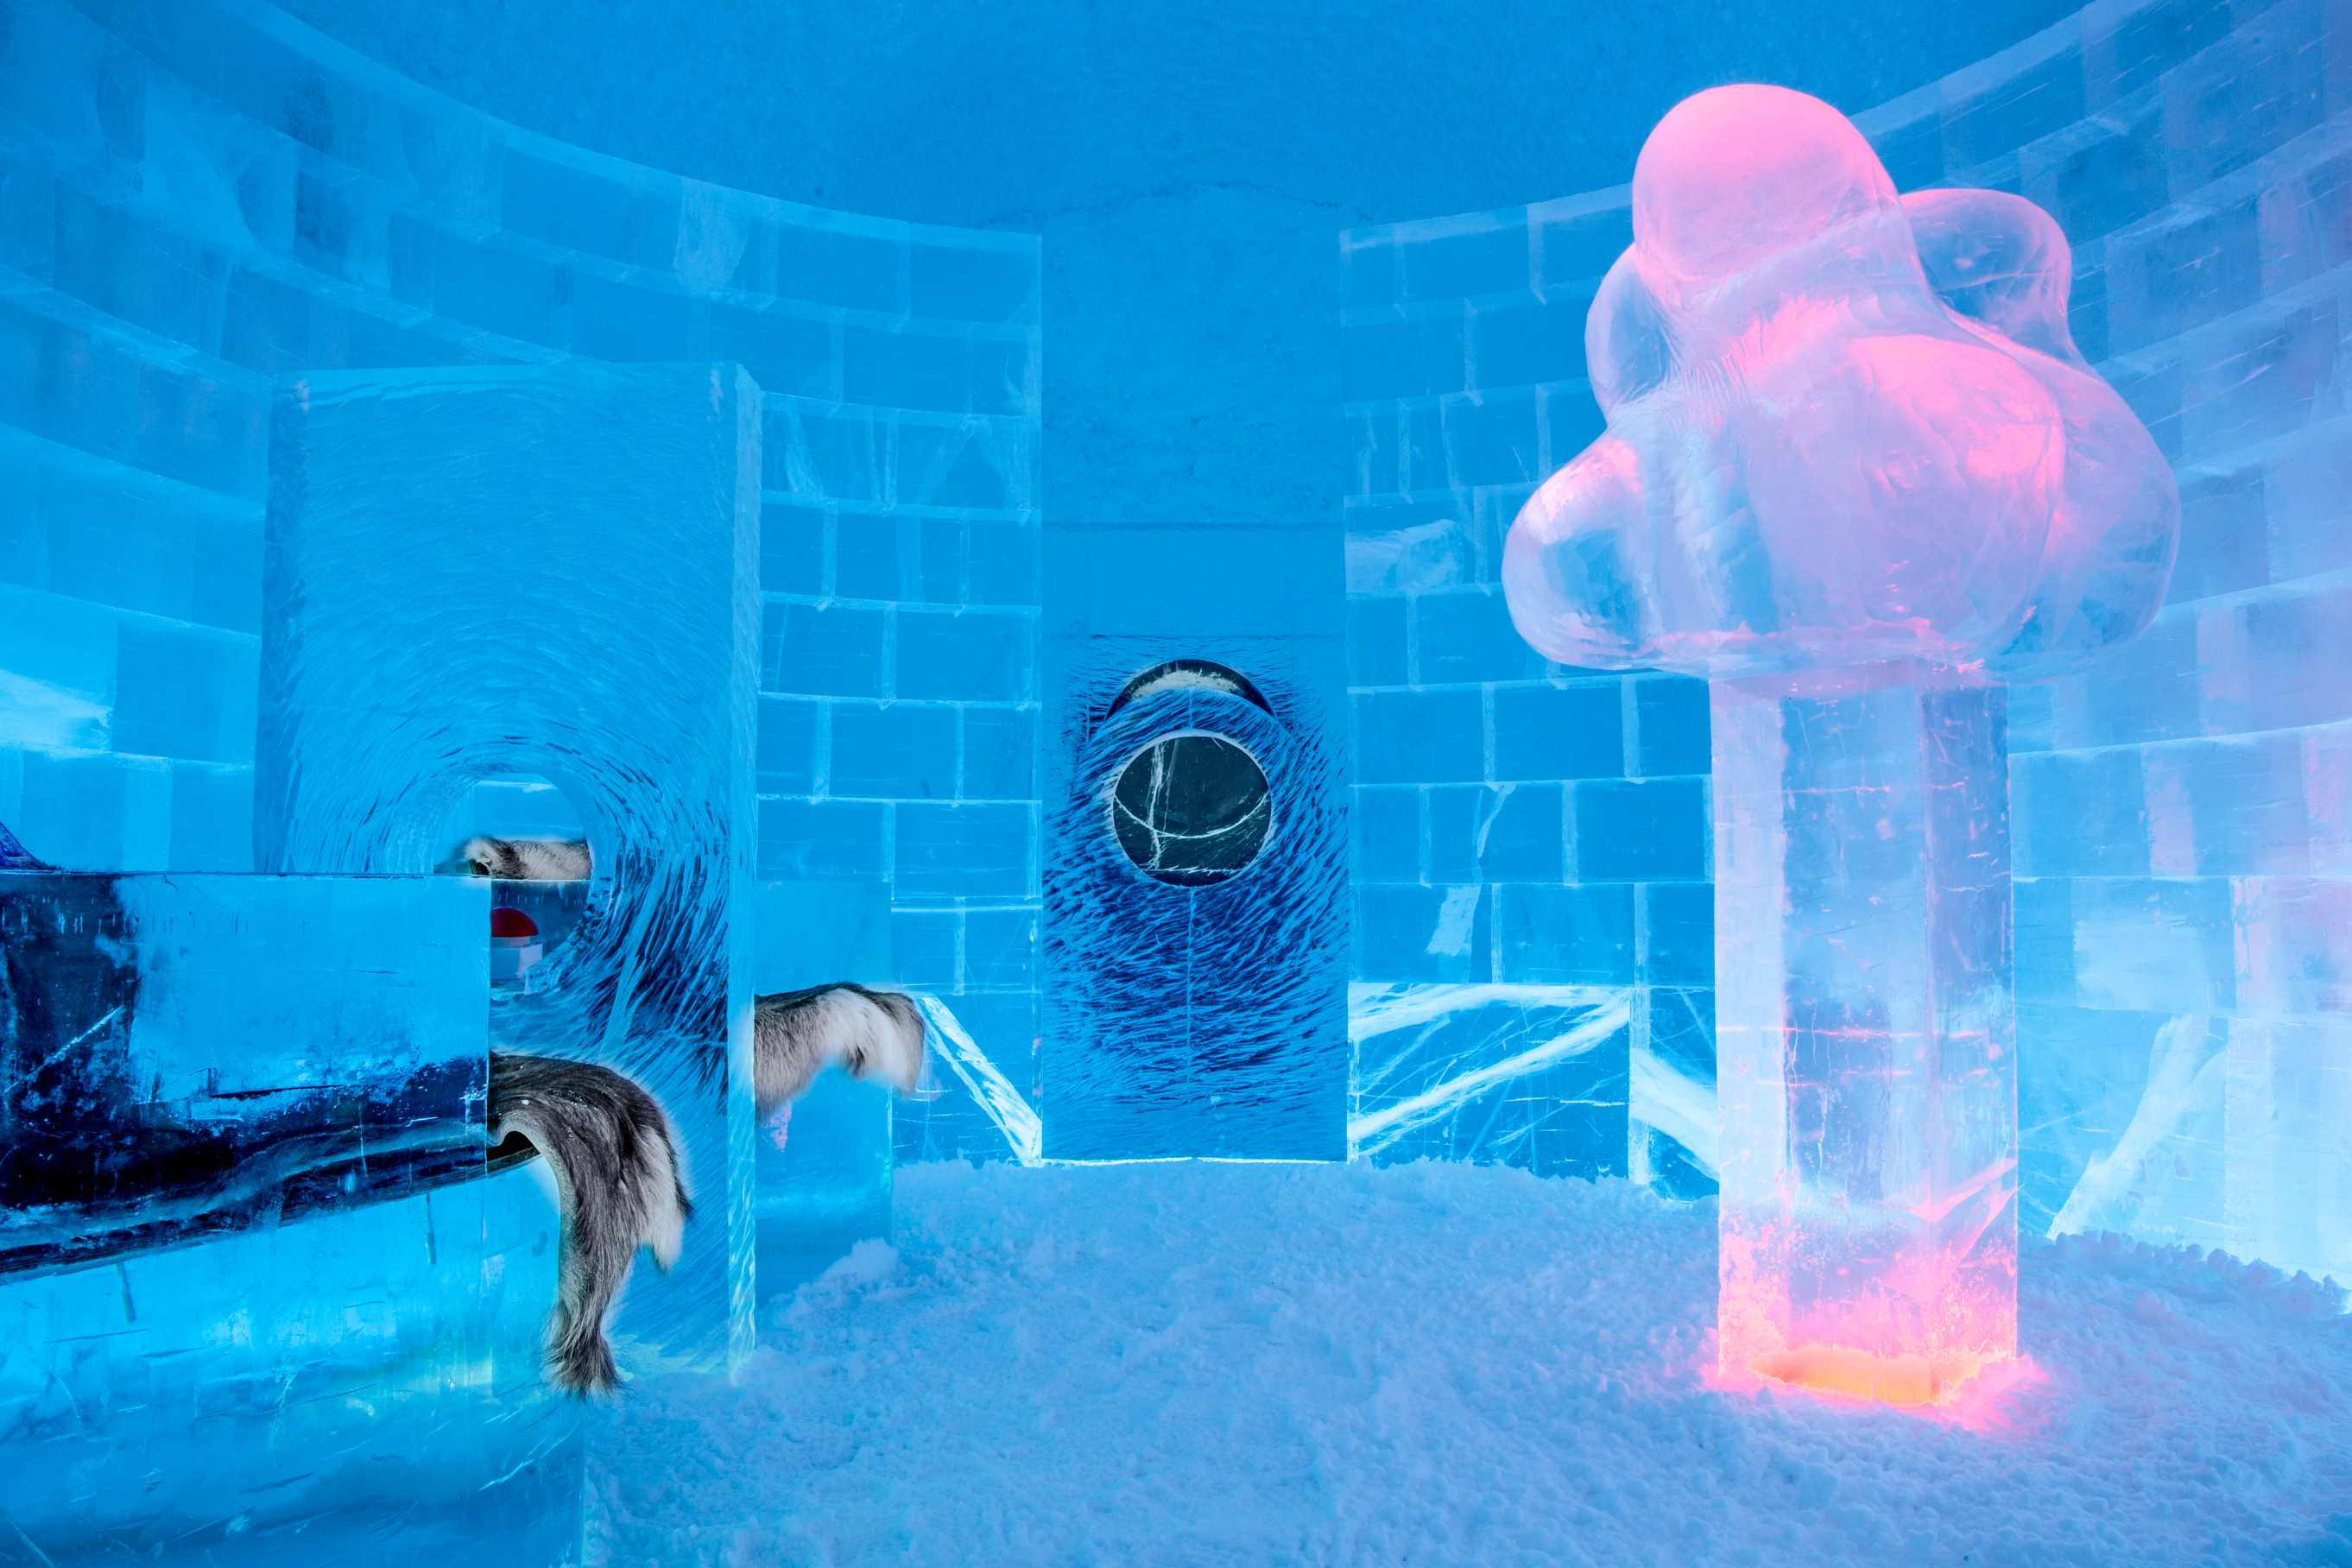 ICEHOTEL 365, 2018 Deluxe Suite Lost & found. Design Jens Thoms Ivarsson and Petri ”Bette” Tuominen. Photo Lars Lindh. © ICEHOTEL. www.icehotel.com